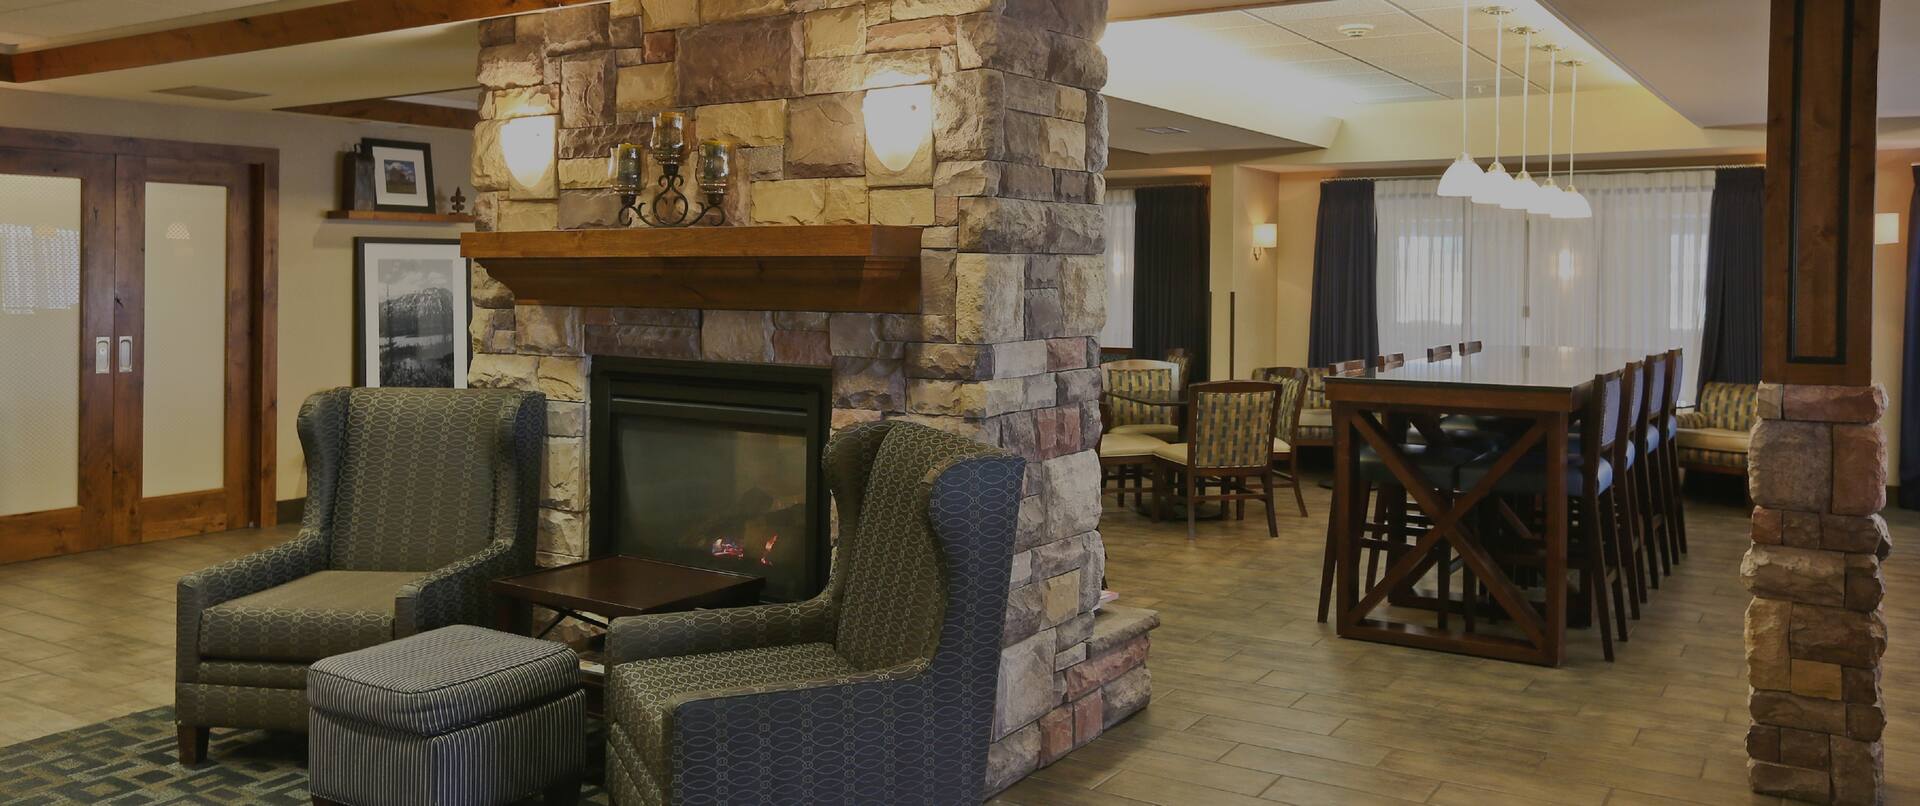 Lobby dining area with high-top table, high chairs, soft chairs, ottoman, and fireplace